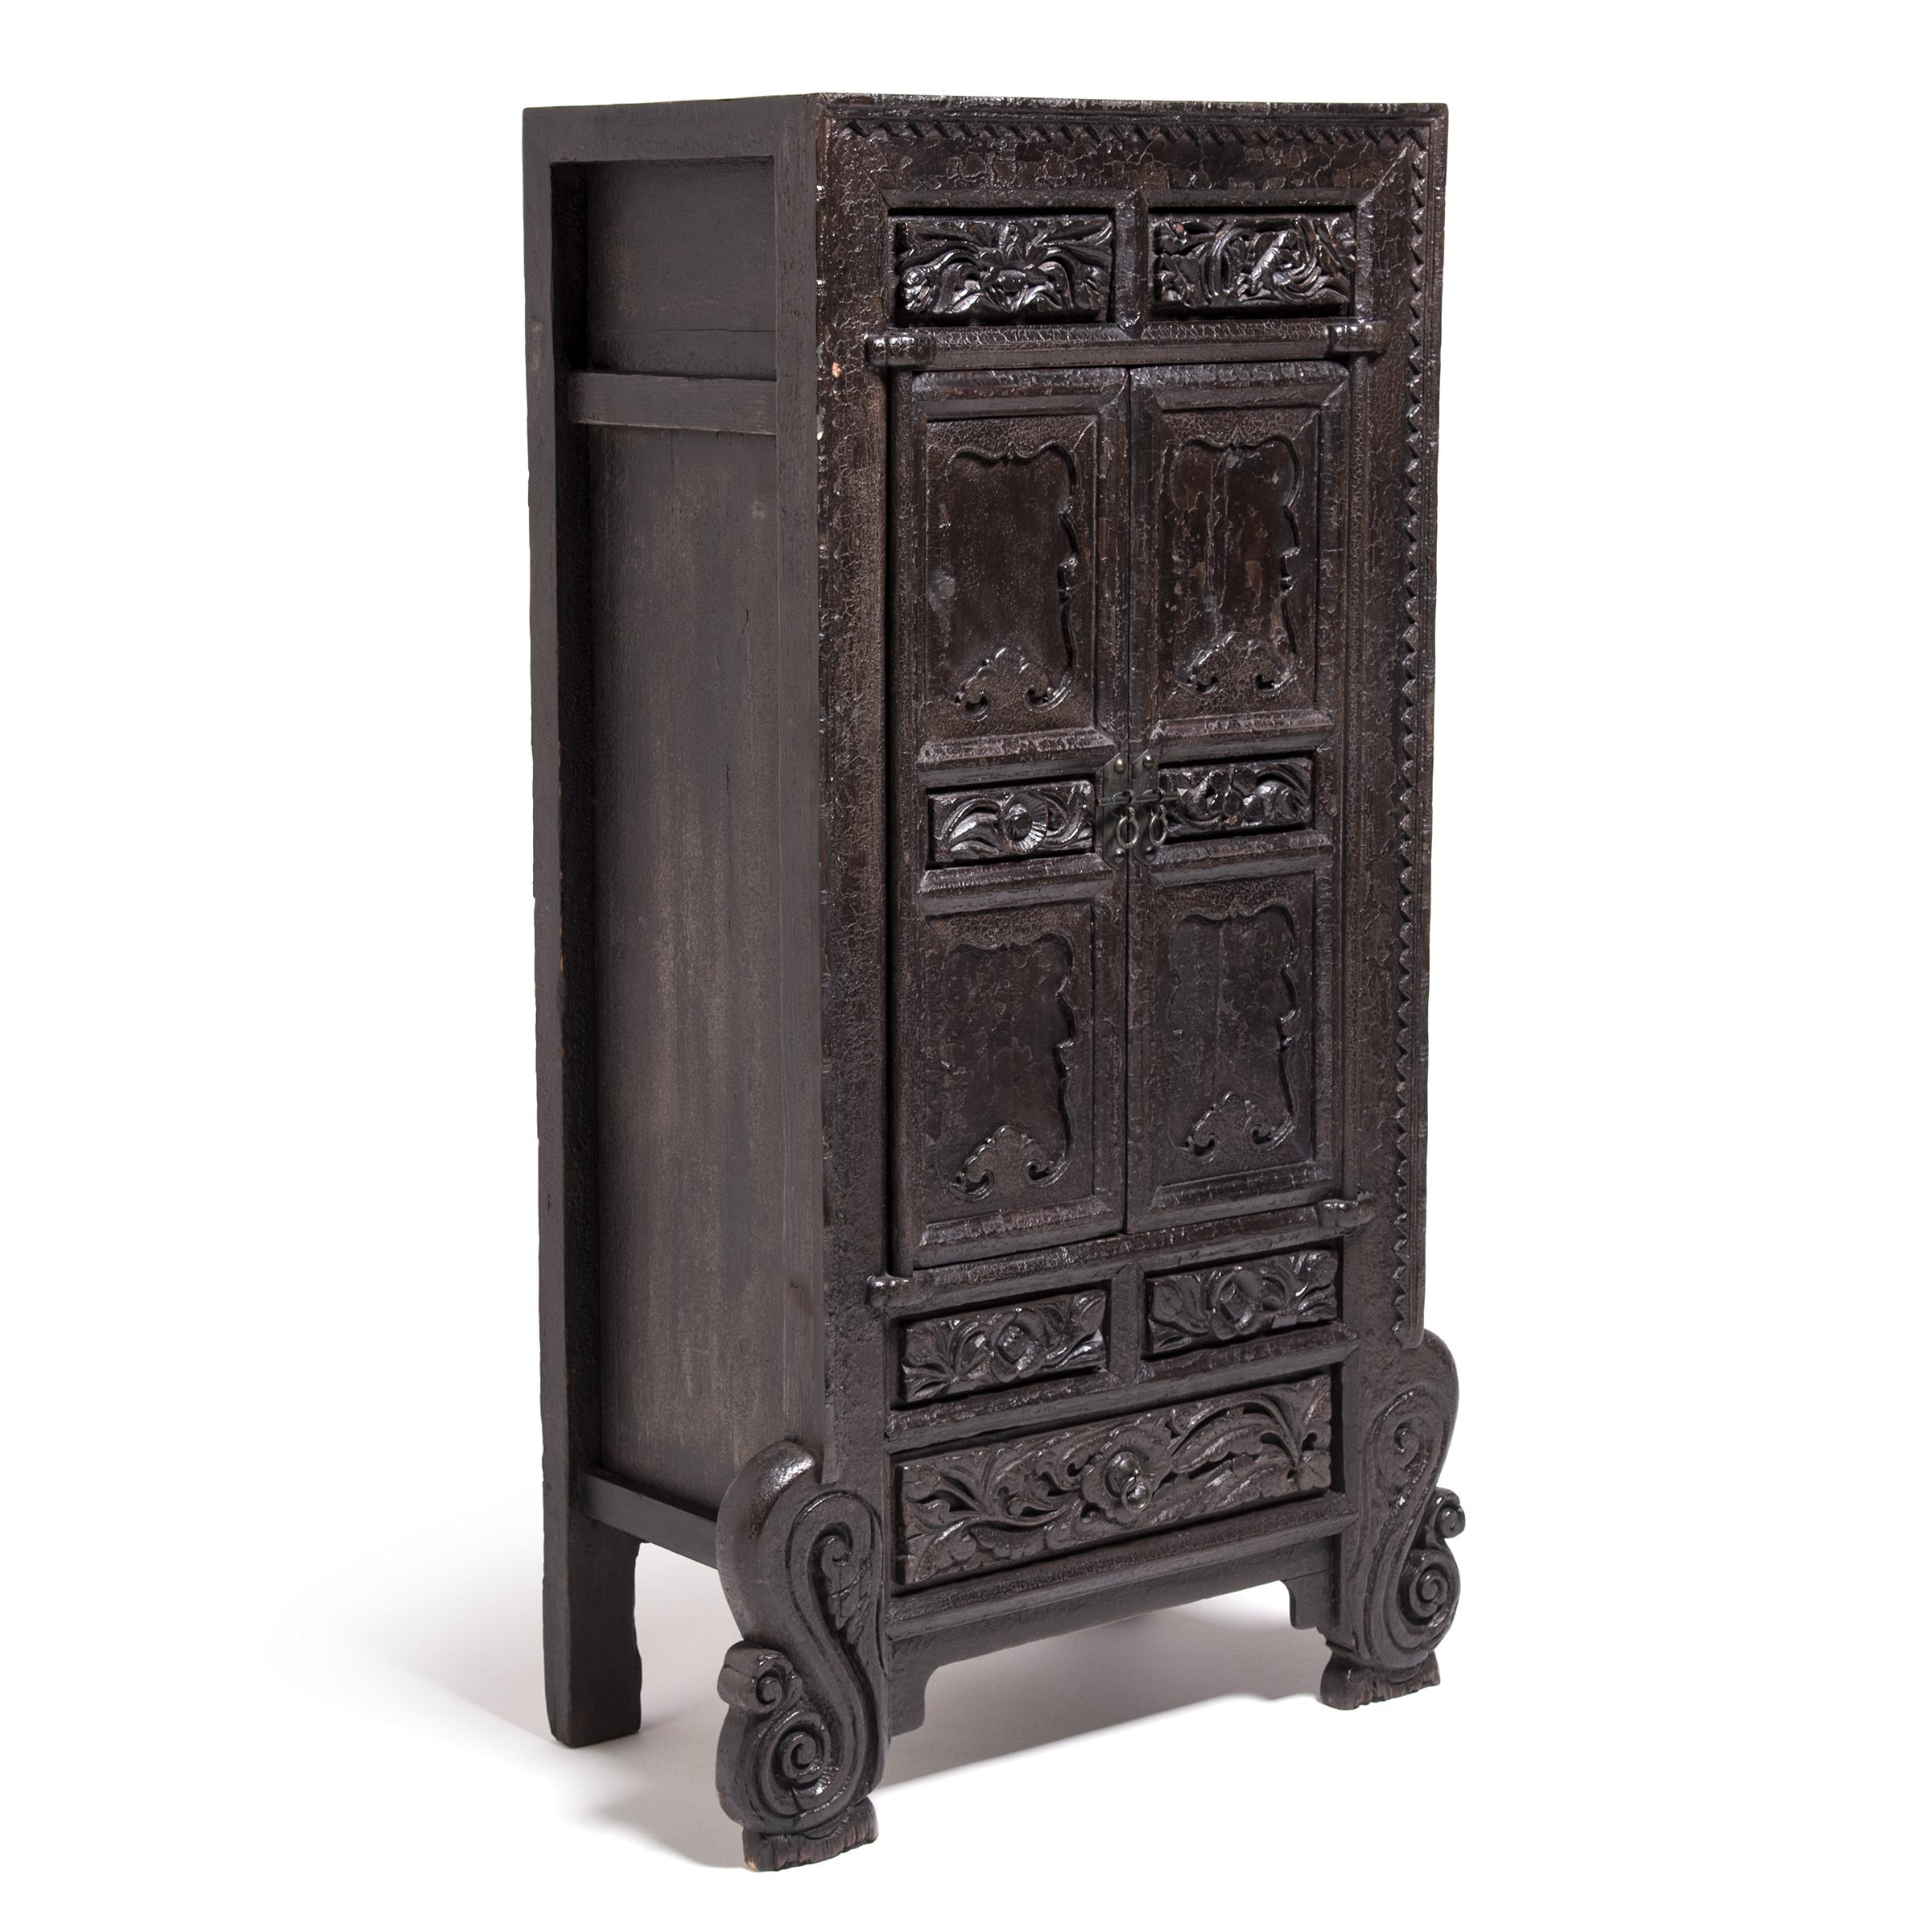 Chinese Pair of Ornate Lacquered Cabinets with Cabriole Legs, c. 1850 For Sale